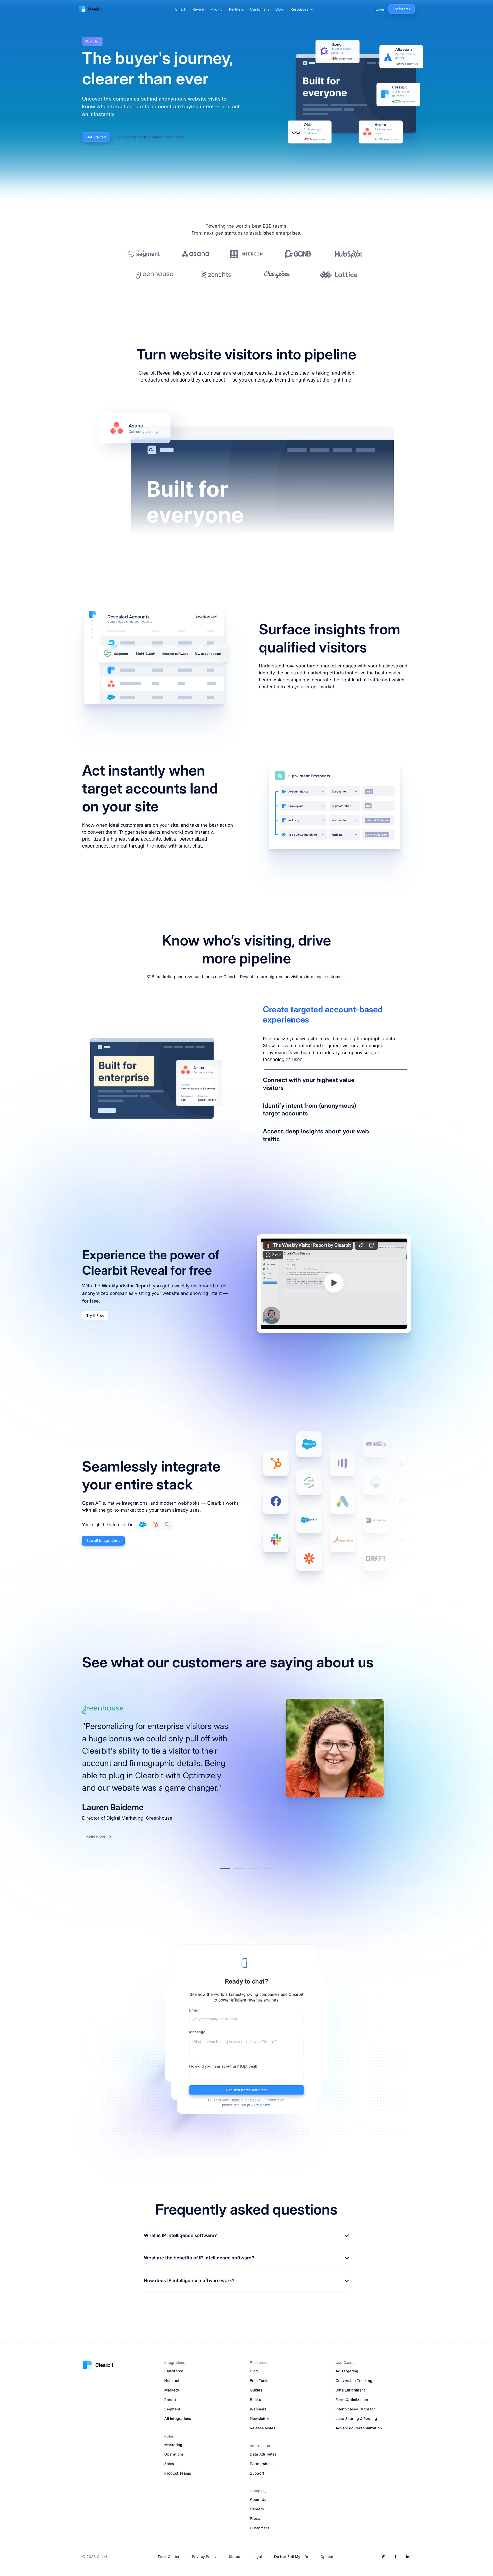 Clearbit Landing Page Example: Clearbit provides go-to-market teams with the industry’s most comprehensive B2B dataset across company, contact, and IP intelligence. Use our full dataset to enrich key systems, build products, and power personalization.